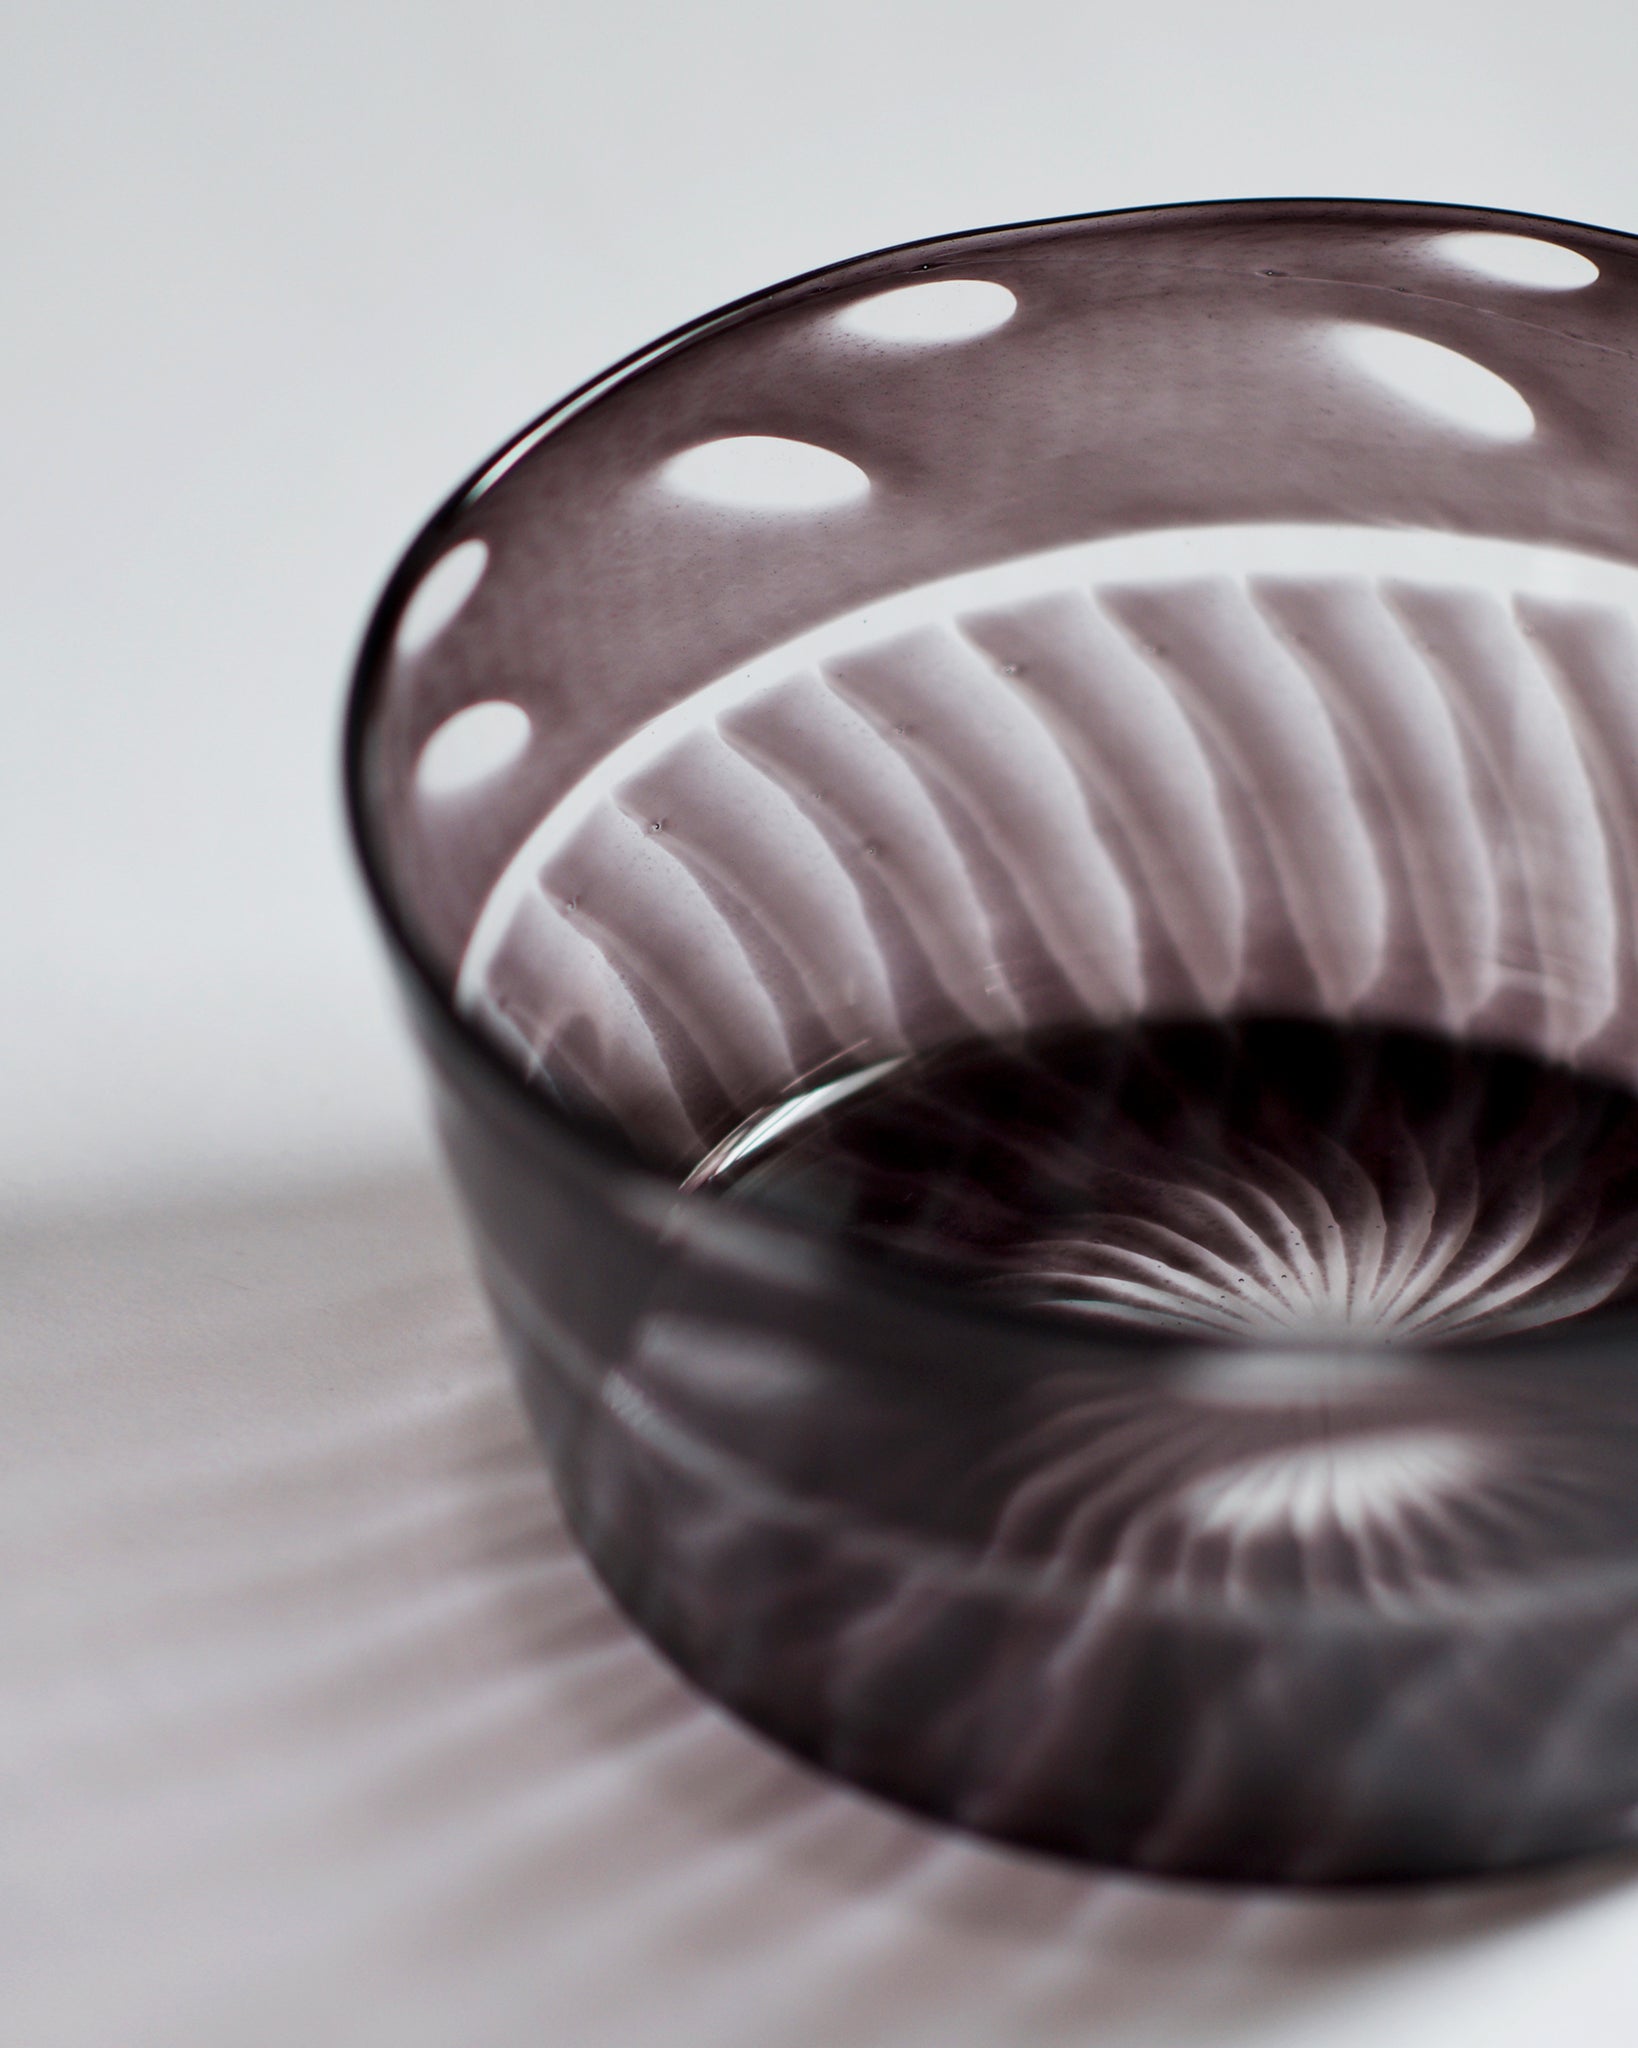 Cropped image of the combi square bowl from a top view. Detailed black and clear patterns of the bowl is visible.